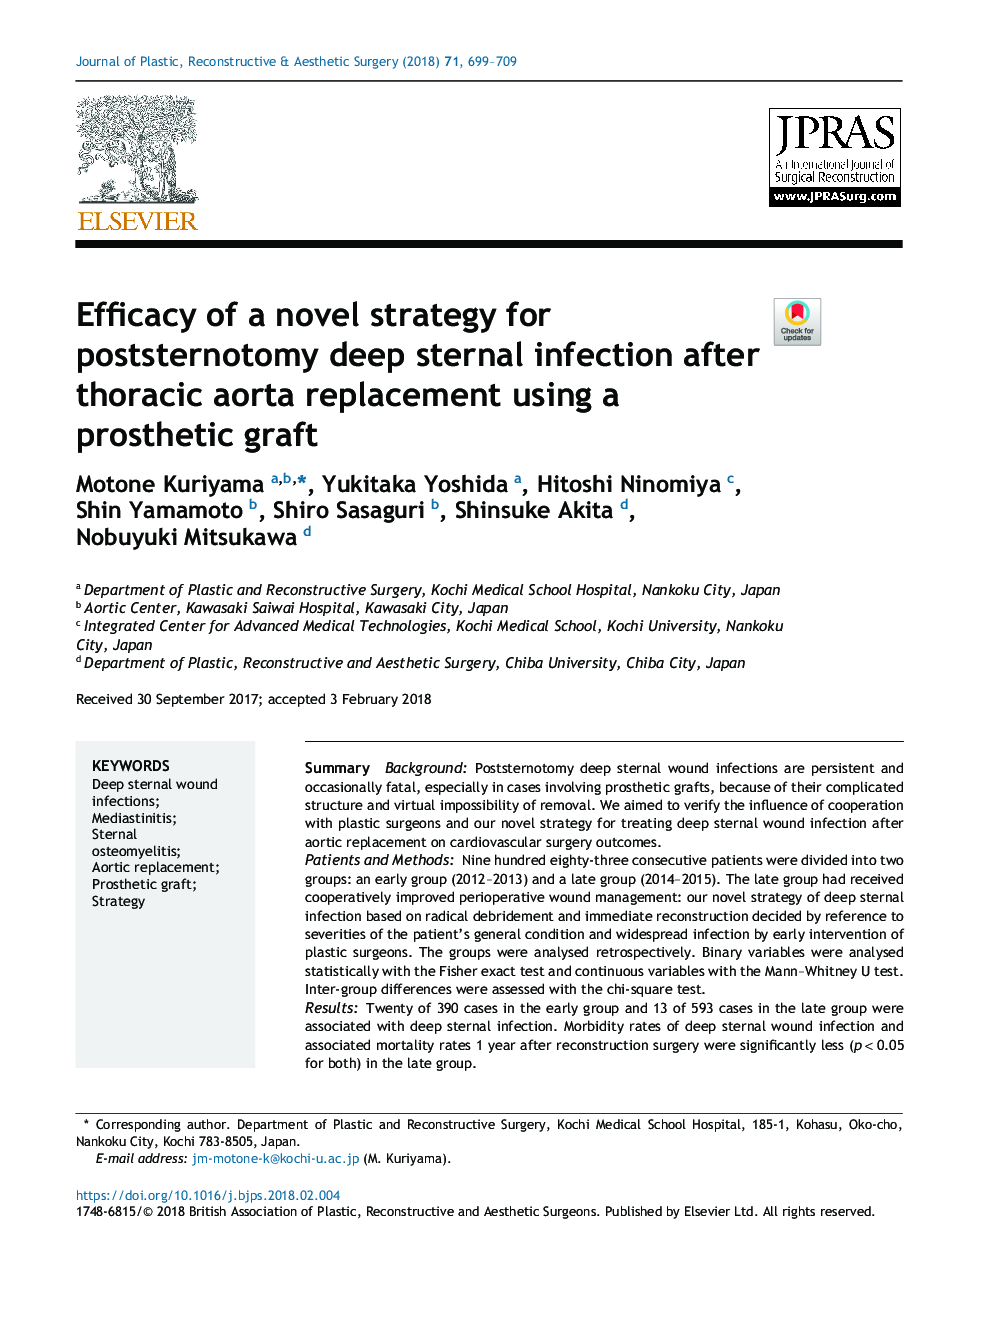 Efficacy of a novel strategy for poststernotomy deep sternal infection after thoracic aorta replacement using a prosthetic graft